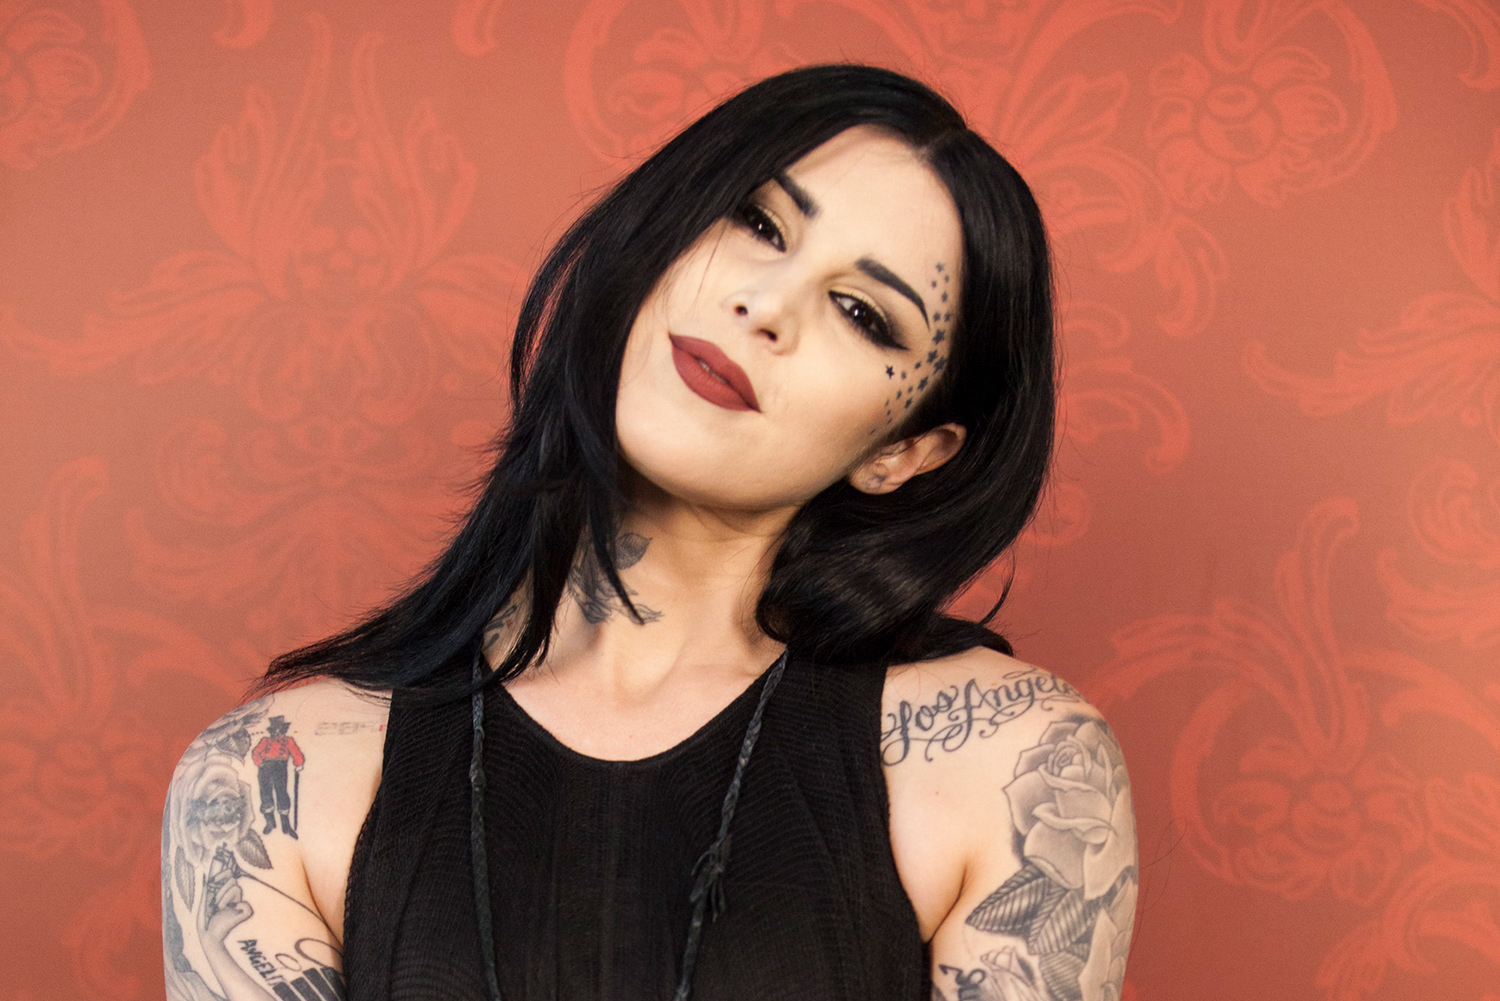 Kat Von D Slammed For Announcing She Won’t Vaccinate Her Baby